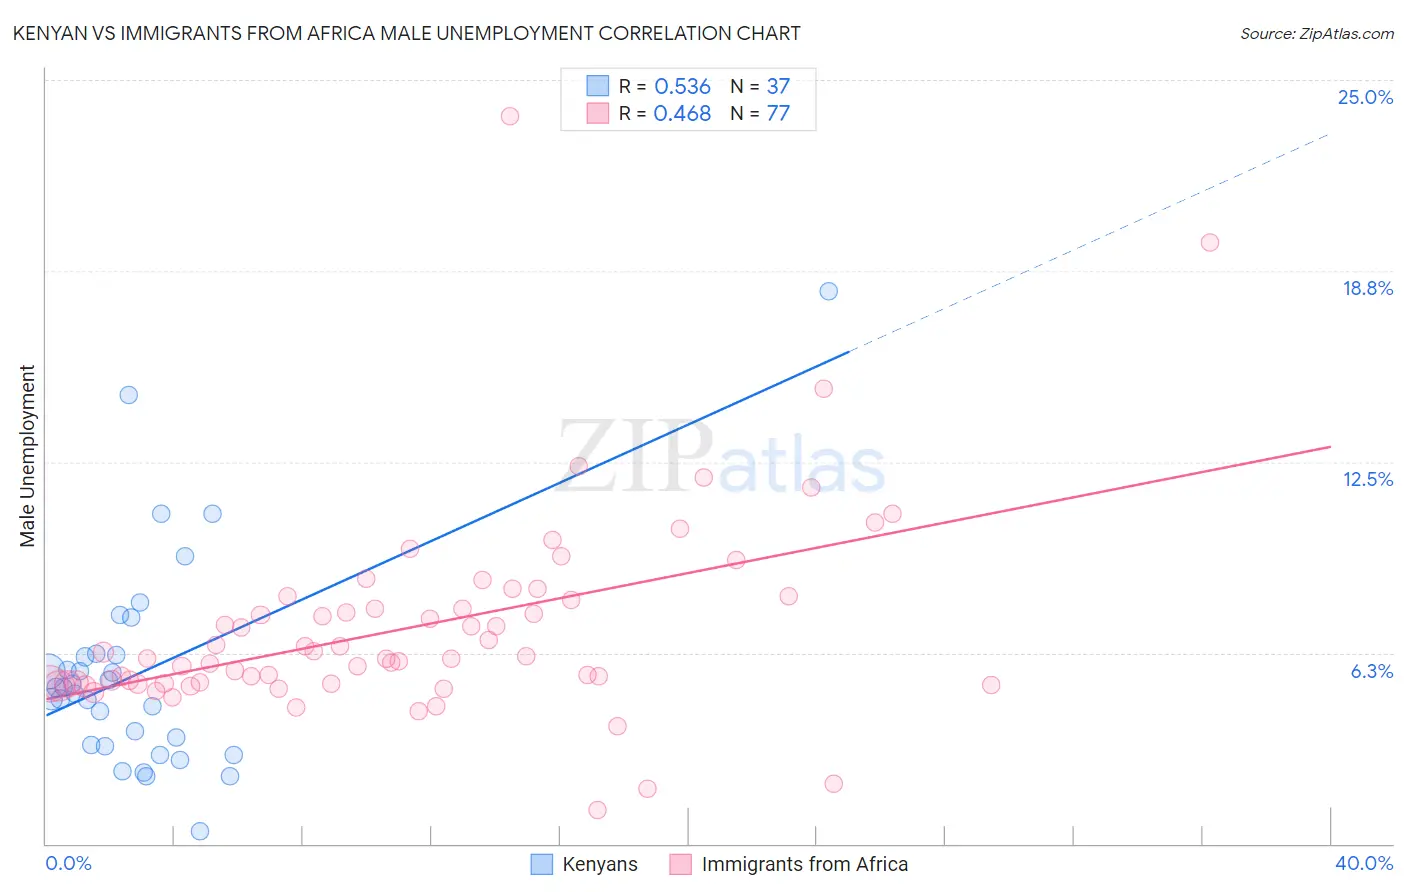 Kenyan vs Immigrants from Africa Male Unemployment